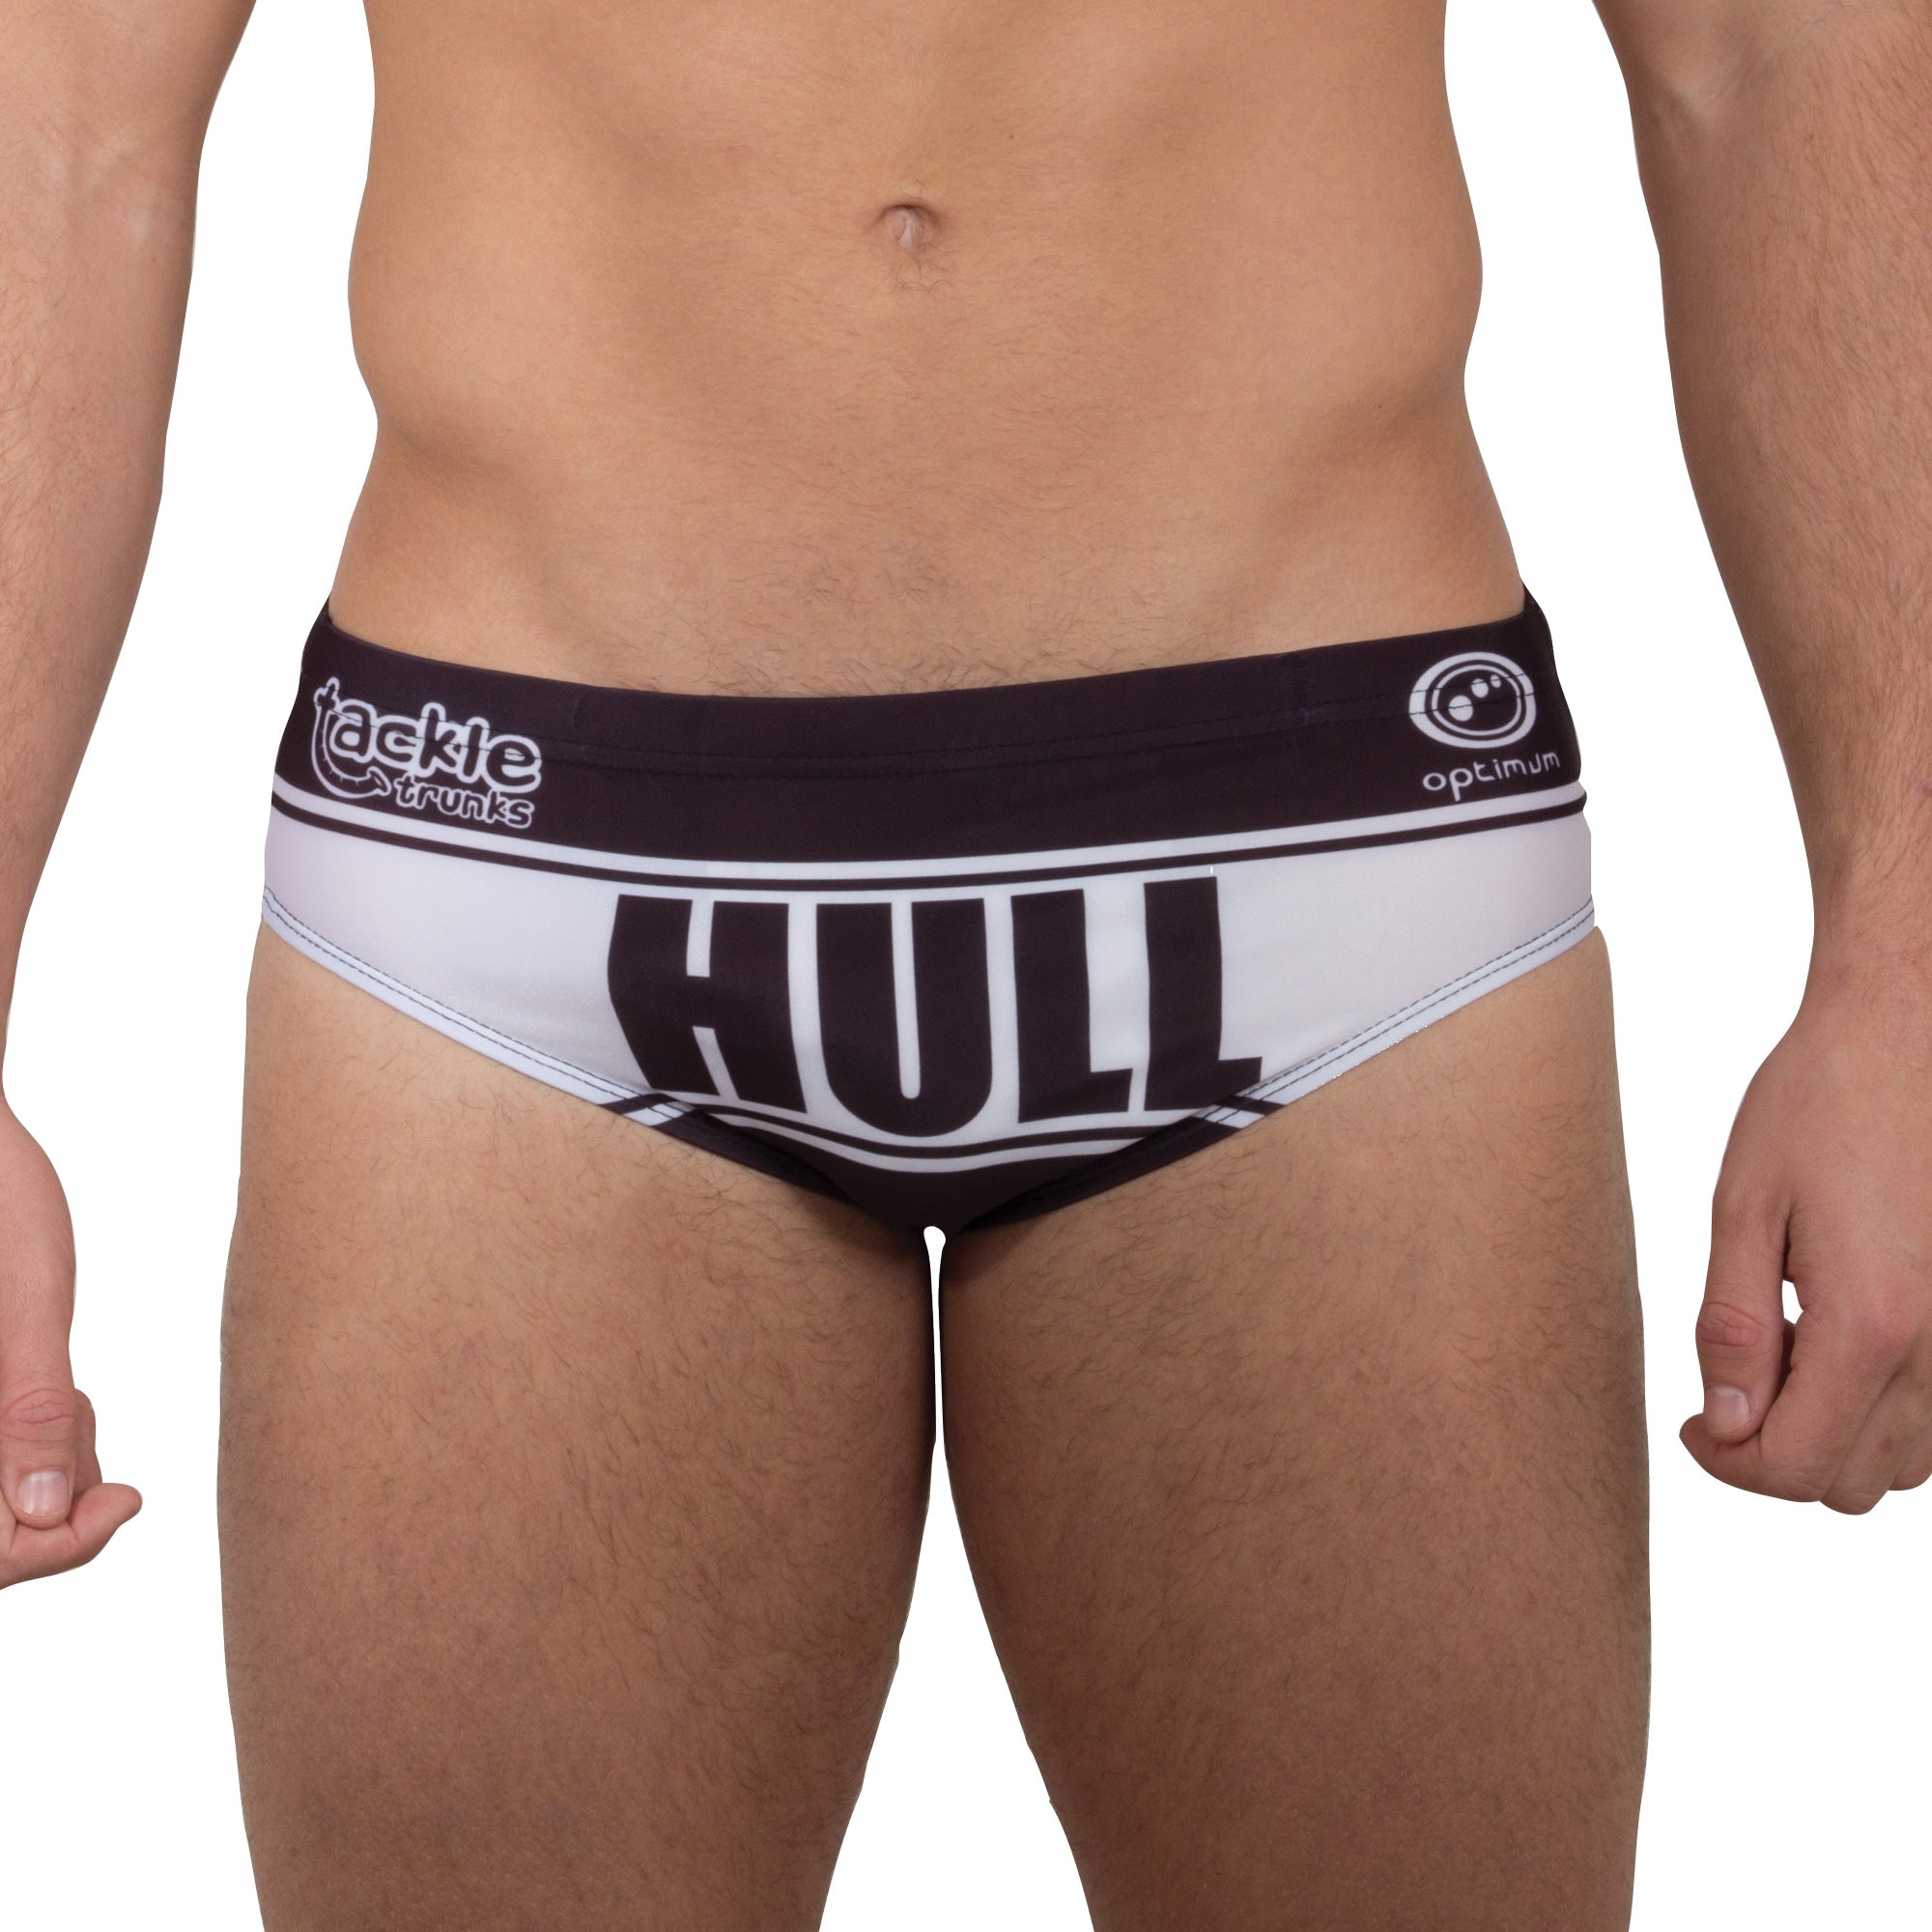 Hull Tackle Trunks Rugby League - Optimum